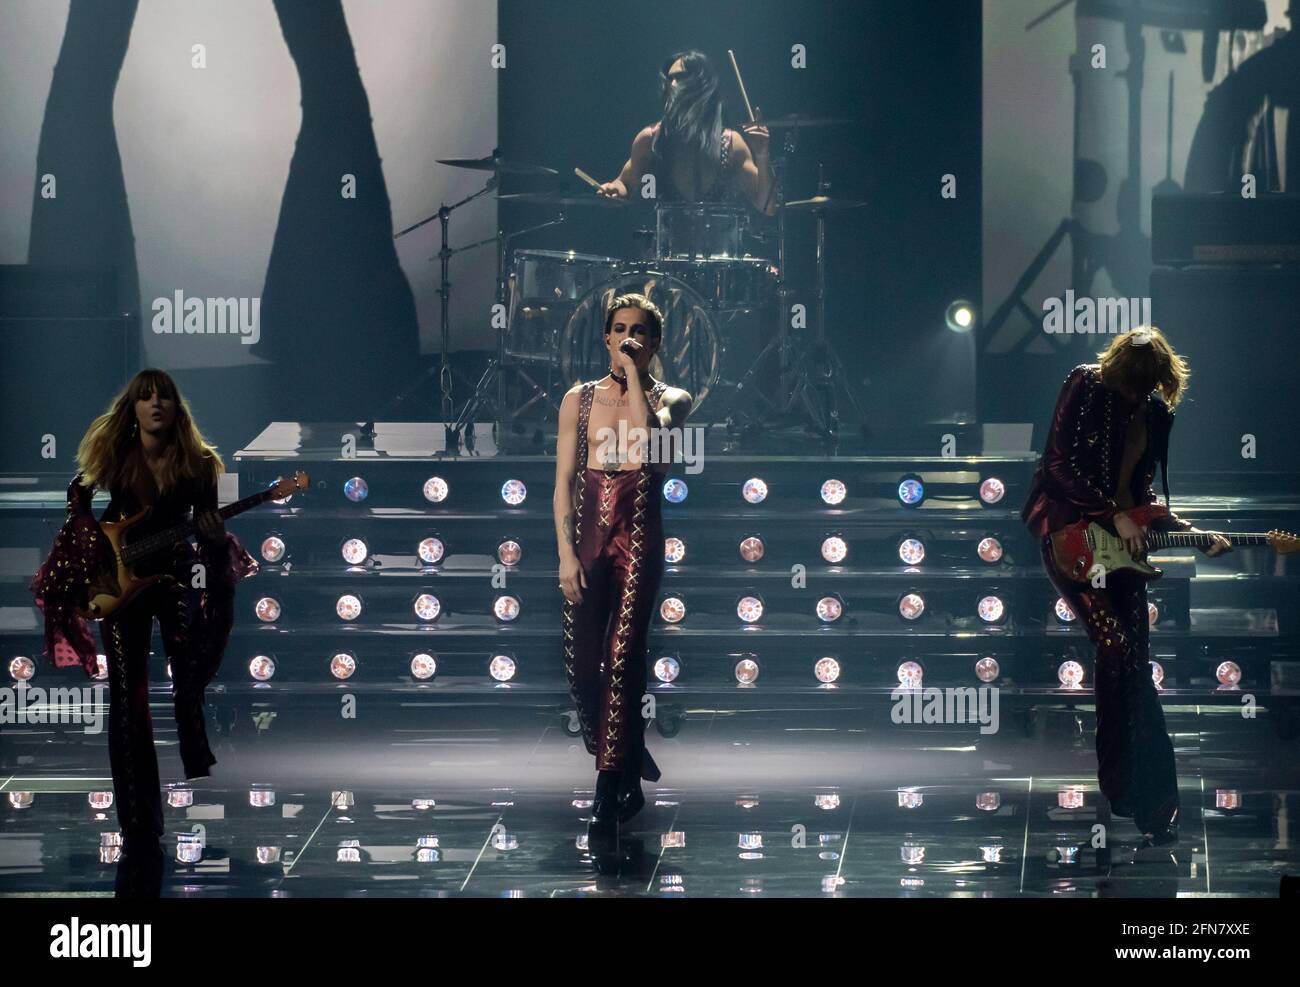 Rotterdam, Netherlands. 15th May 2021. Maneskin (Damiano David, Victoria De Angelis, Thomas Raggi, Ethan Torchio), representing Italy performing the song Zitti e buoni at the rehearsal of the Eurovision song contest 2021. Credit: Nearchos/Alamy Live News Stock Photo